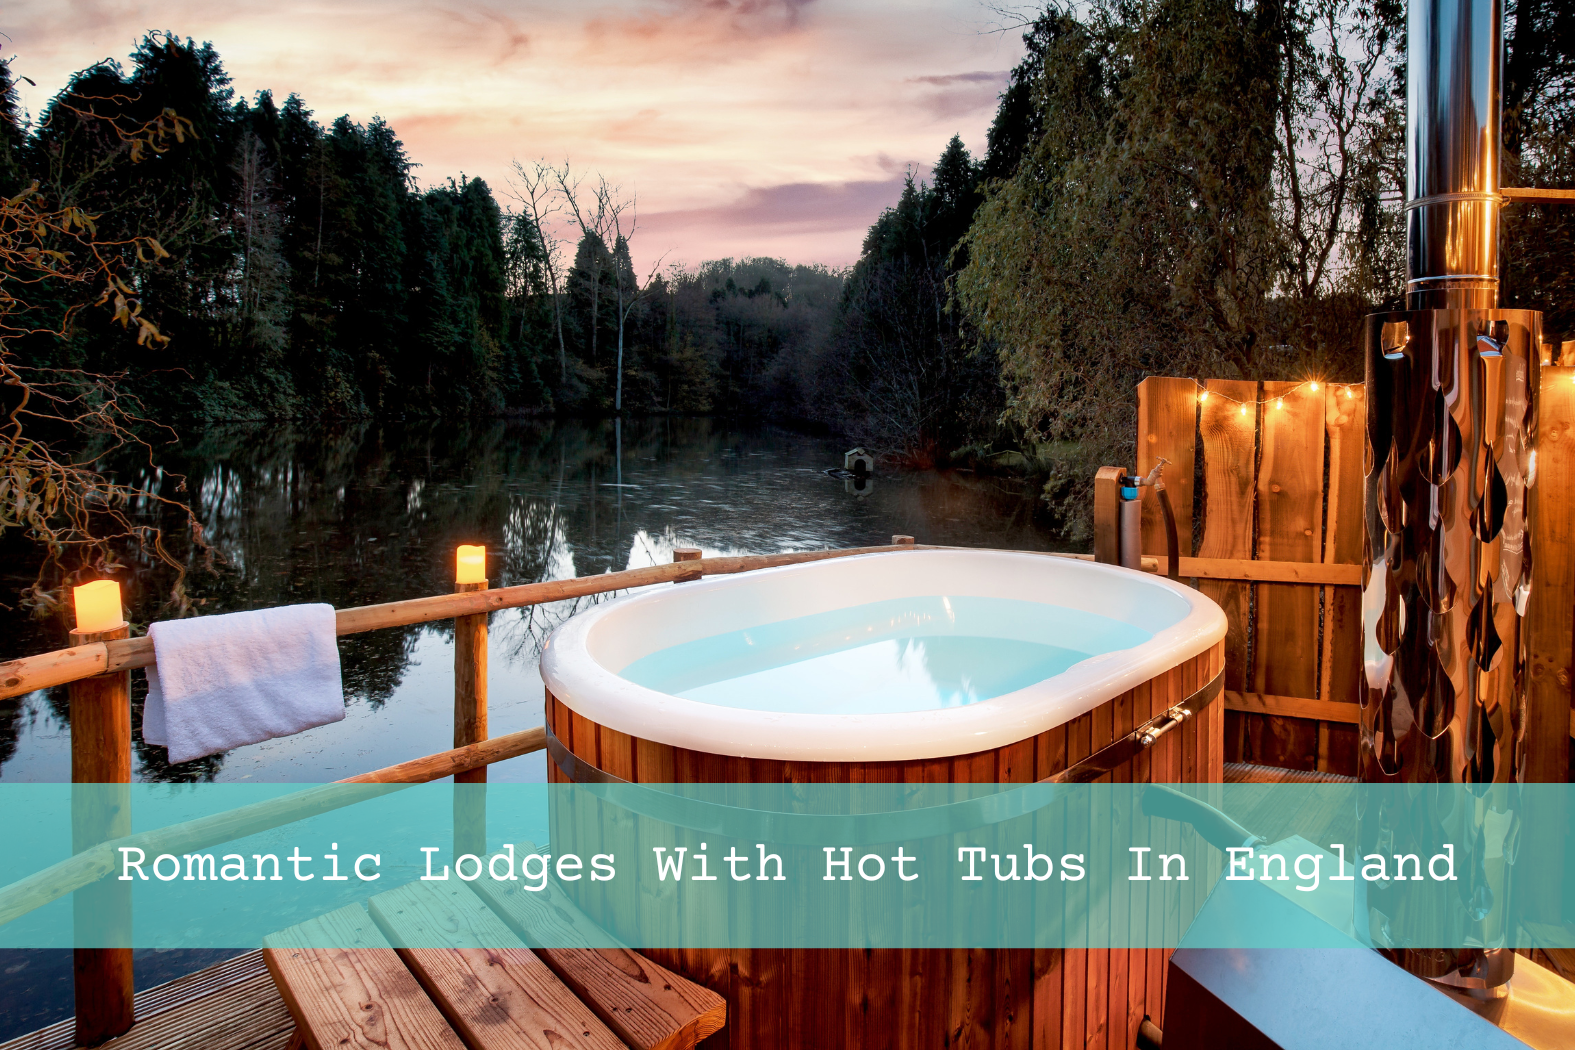 Romantic Lodges With Hot Tubs (Pictured - The Shepherds Hut Retreat)